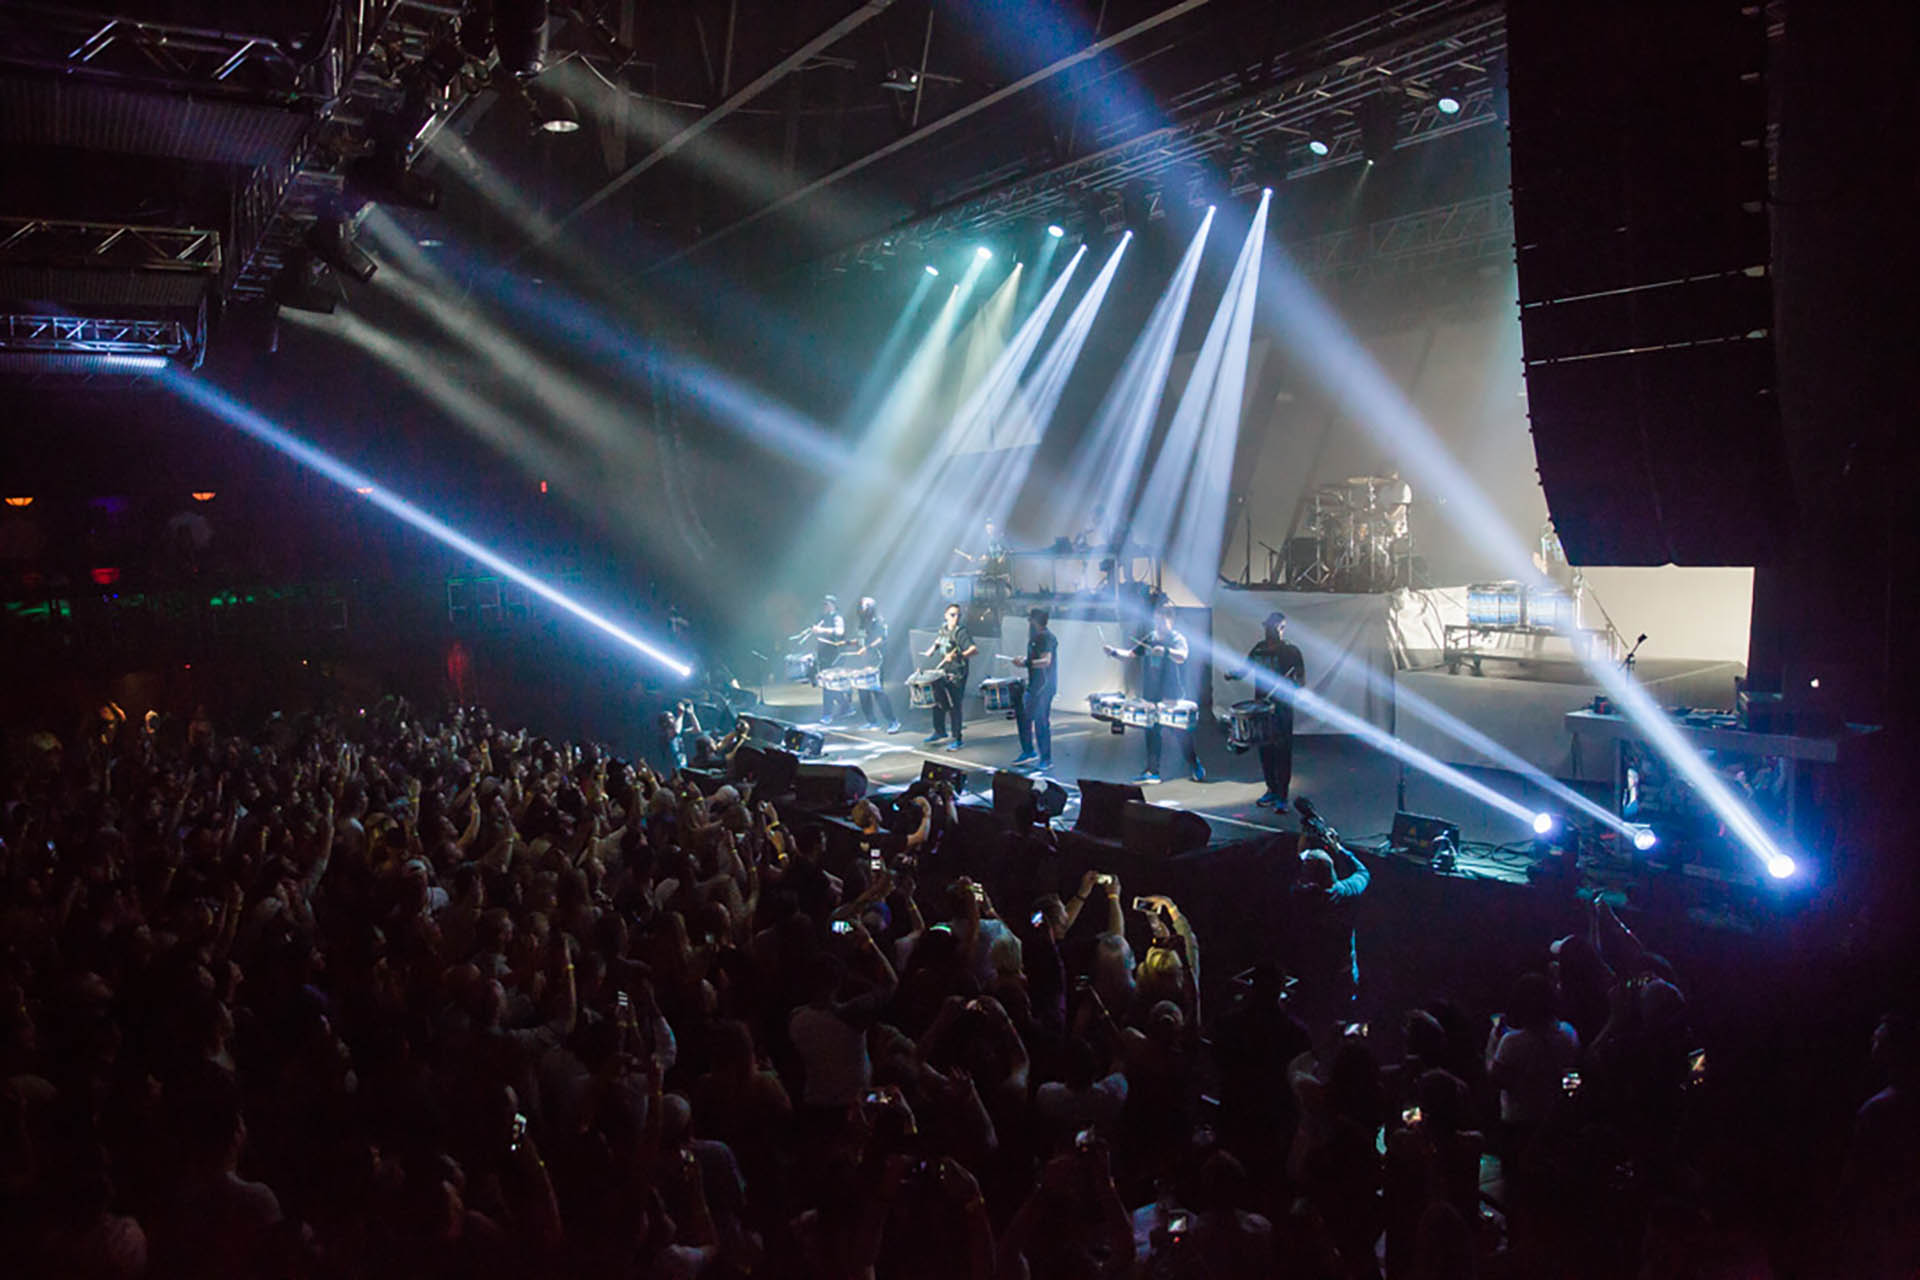 DFW live event photography; wide photo of a musical group performing on stage surrounded by many spotlights pointing in many directions. A large crowd is seen enjoying the performance in the foreground.